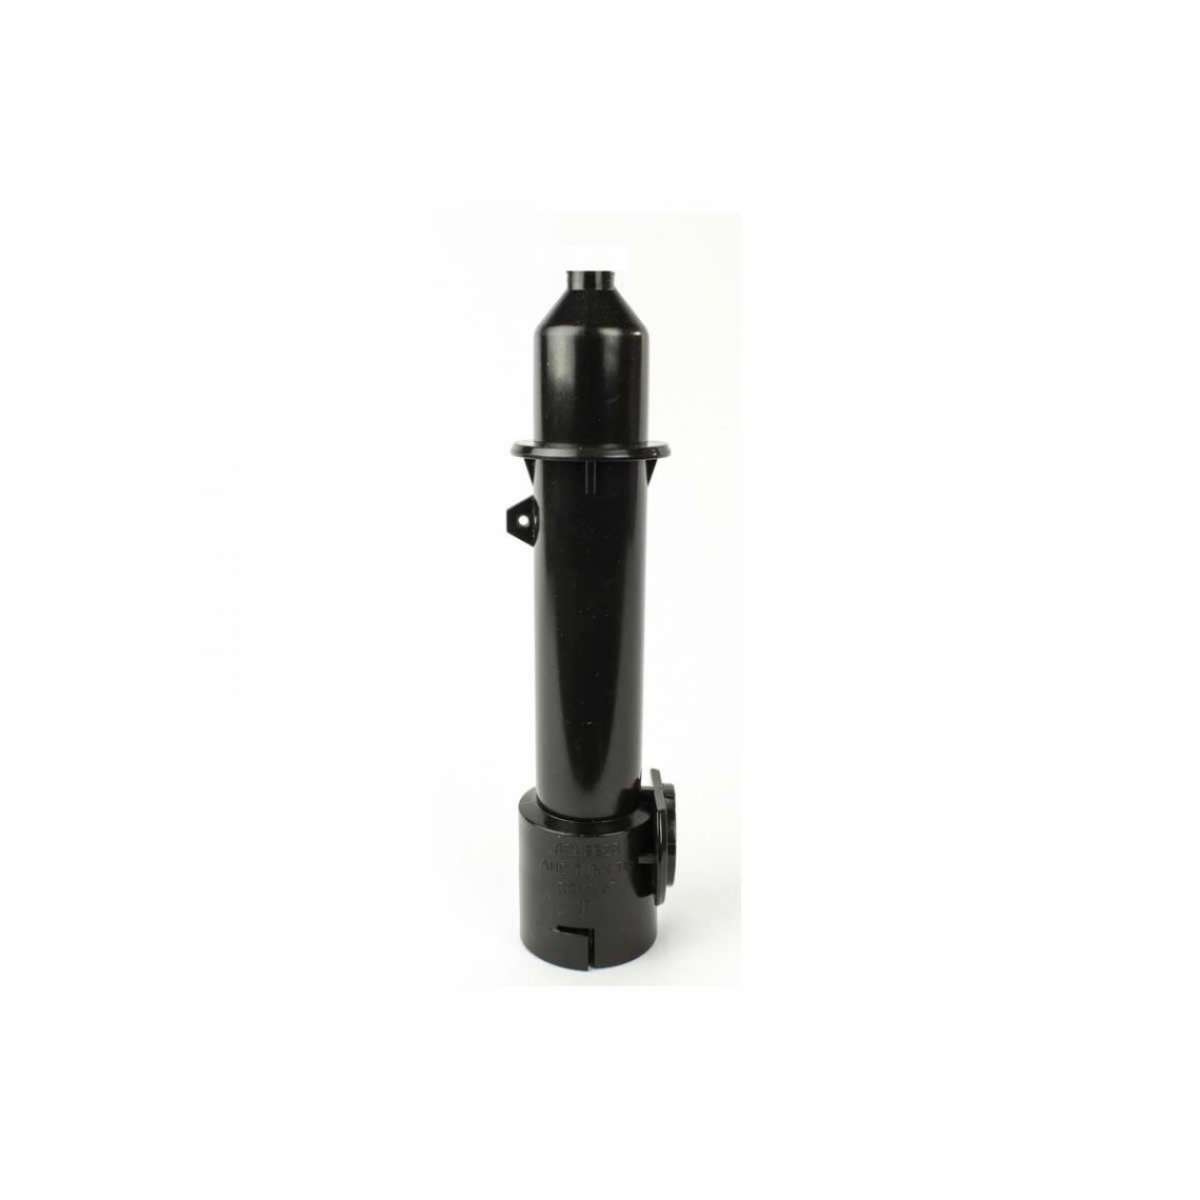 IsoLink 8" Rigid Spout with 1/2" Tip - Black